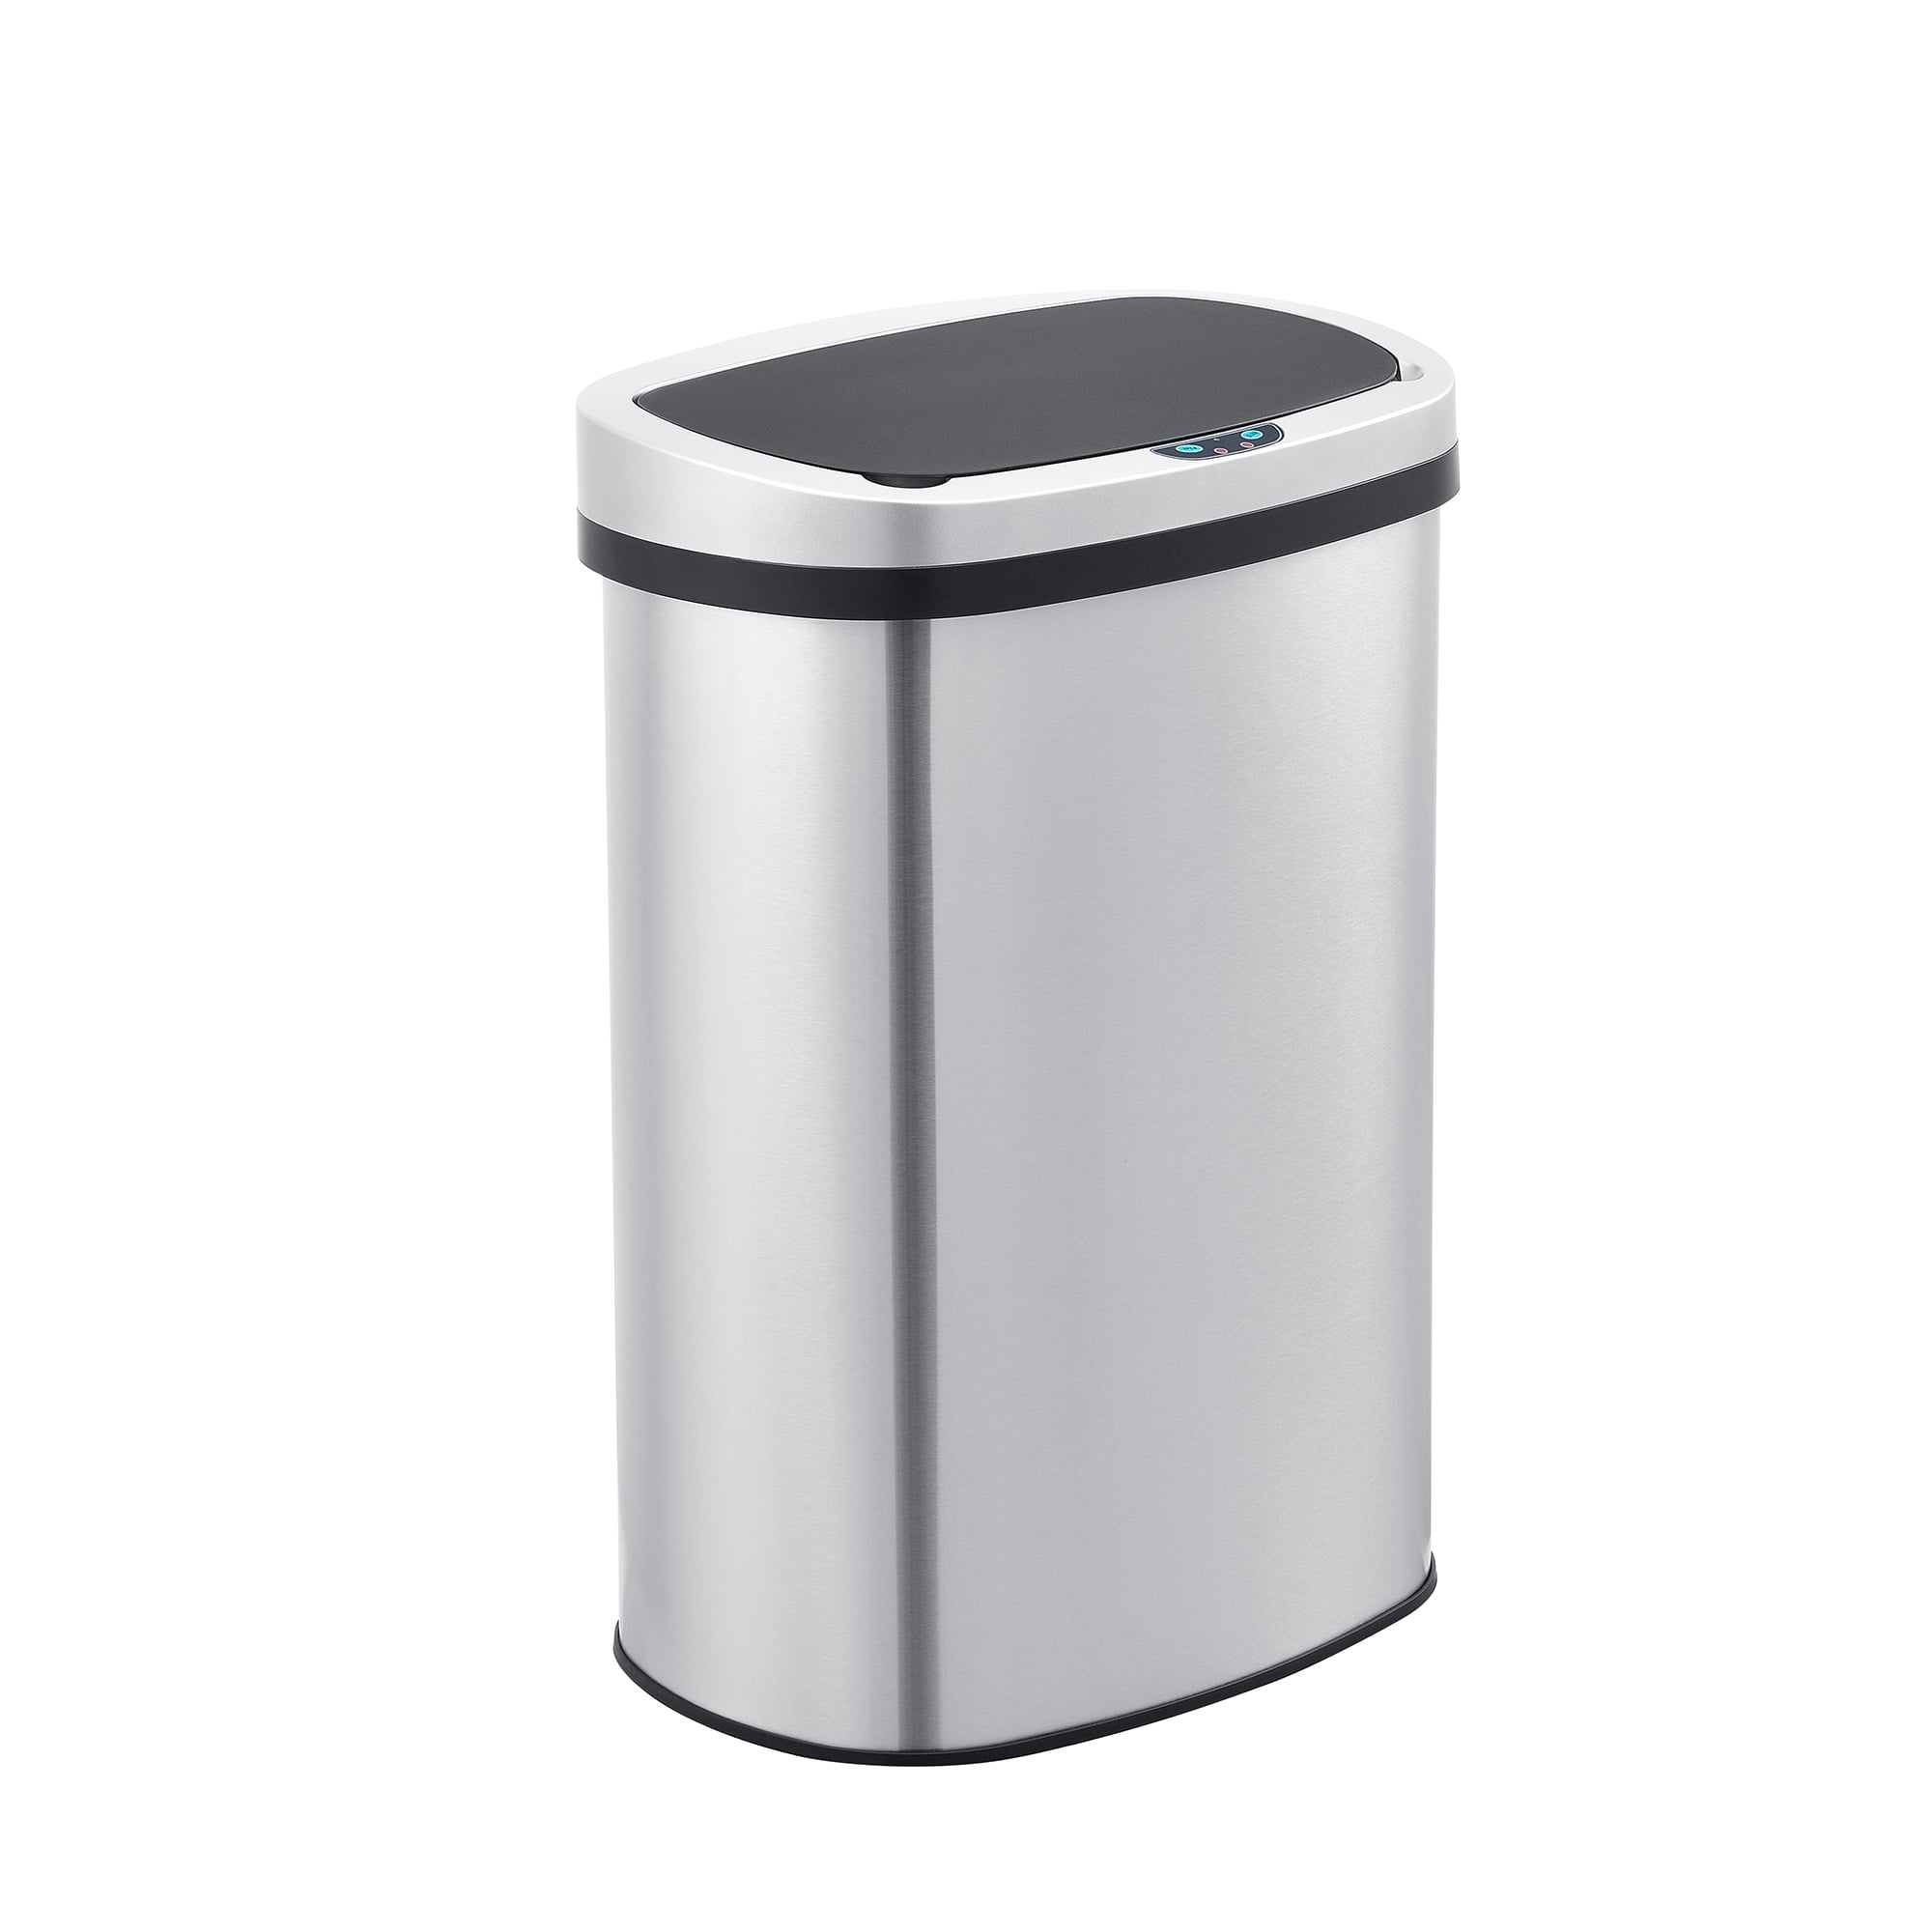 13.2 Gallon Mainstay MS-50-22 Motion Sensor Trash Can Stainless Steel for sale online 